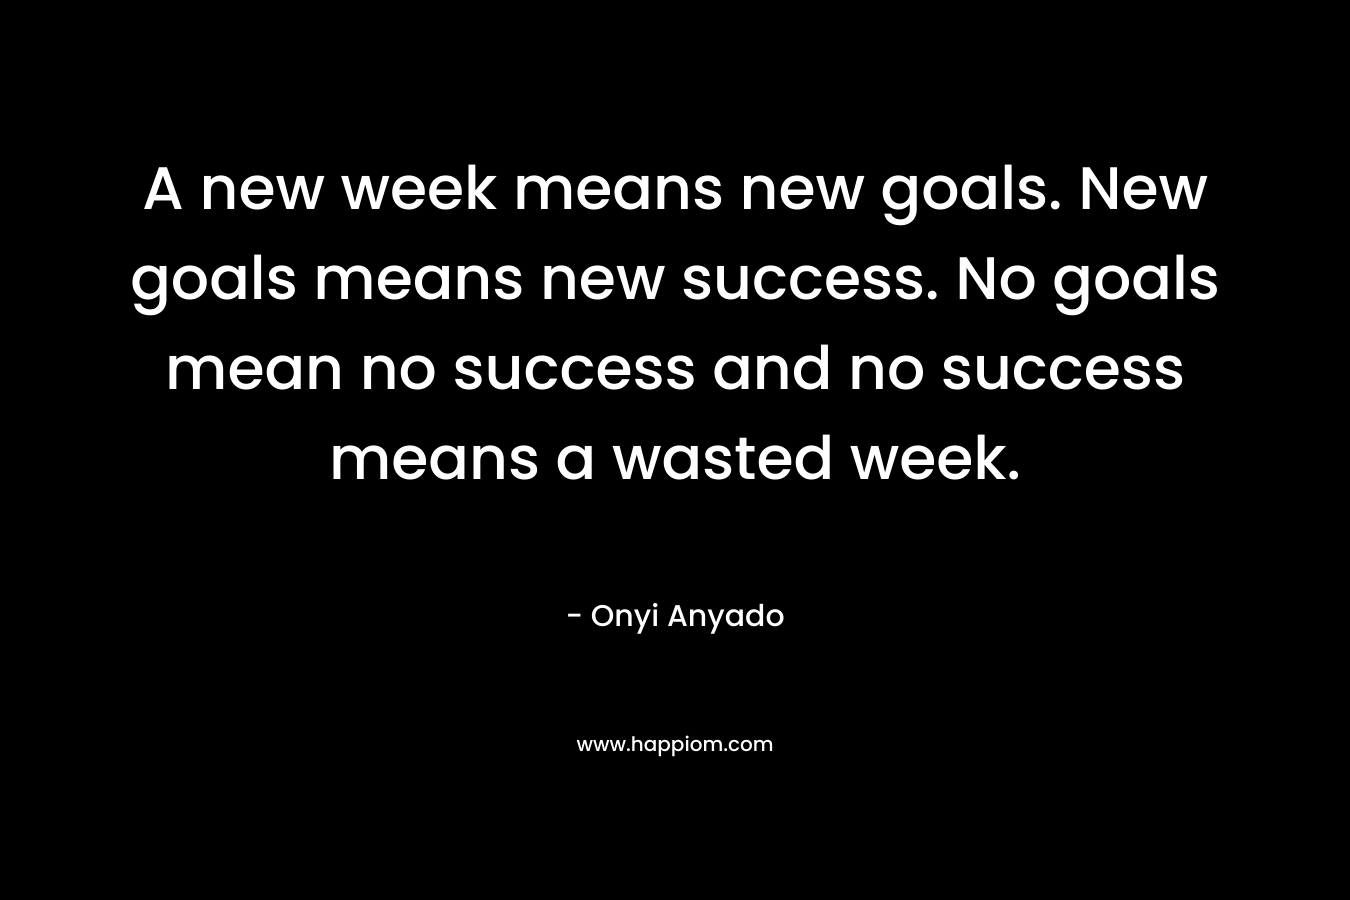 A new week means new goals. New goals means new success. No goals mean no success and no success means a wasted week.